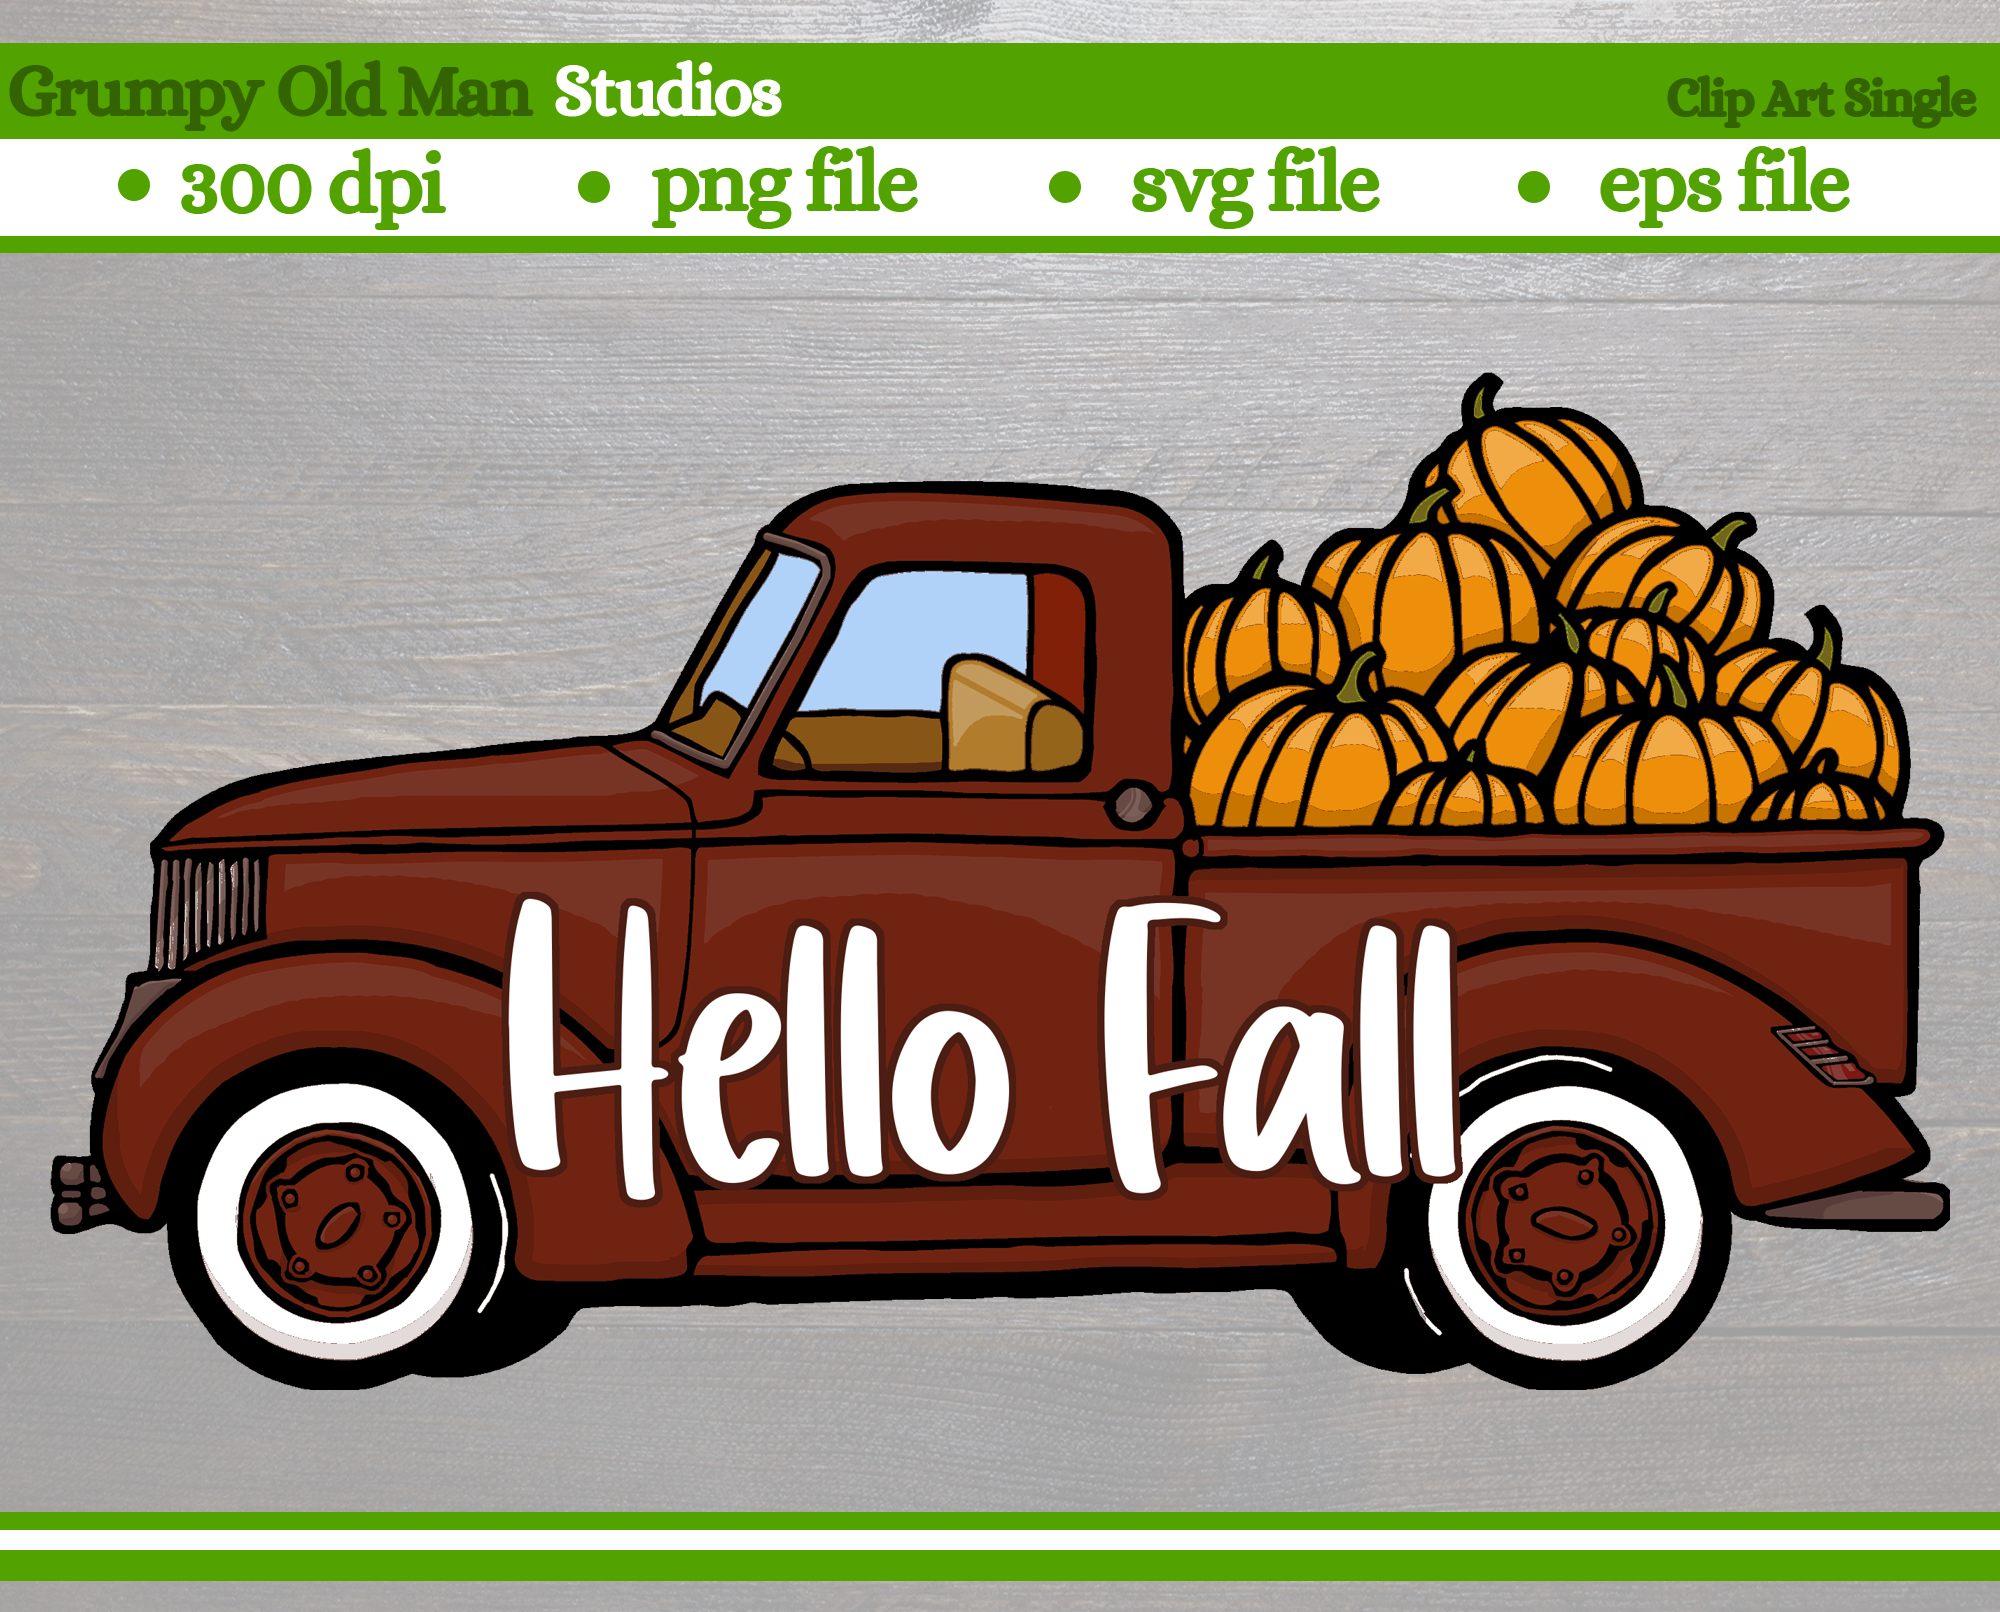 1950s red vintage truck  hello fall By Grumpy Old Man Studios